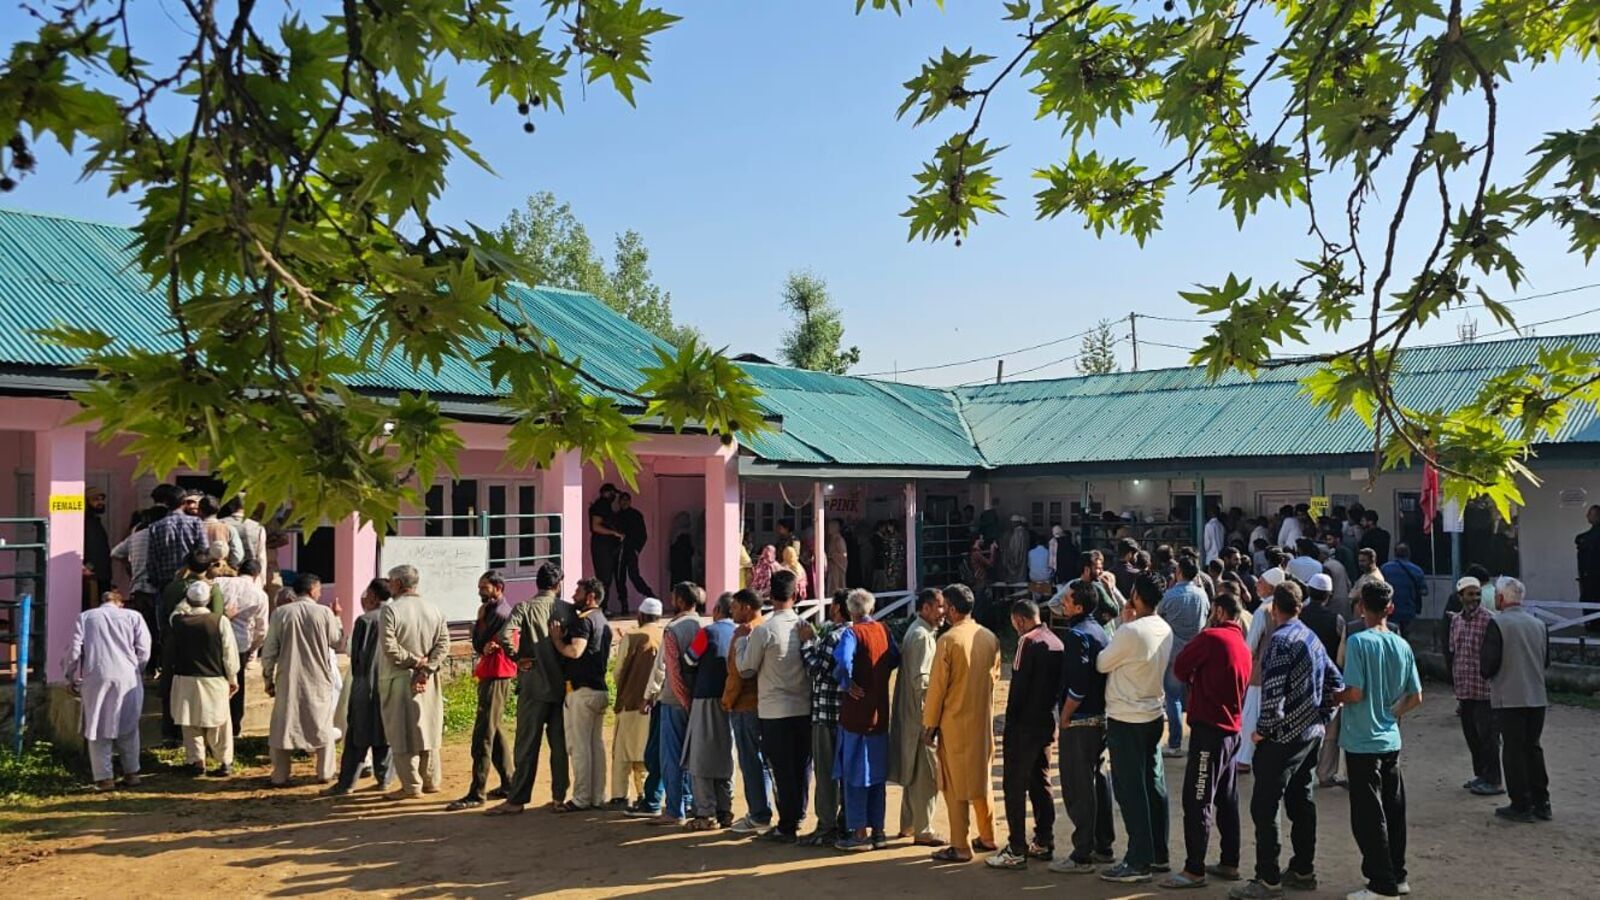 Kashmir News: After highest voter turnout in Srinagar, will Baramulla break 1996 record in fifth phase polling today?